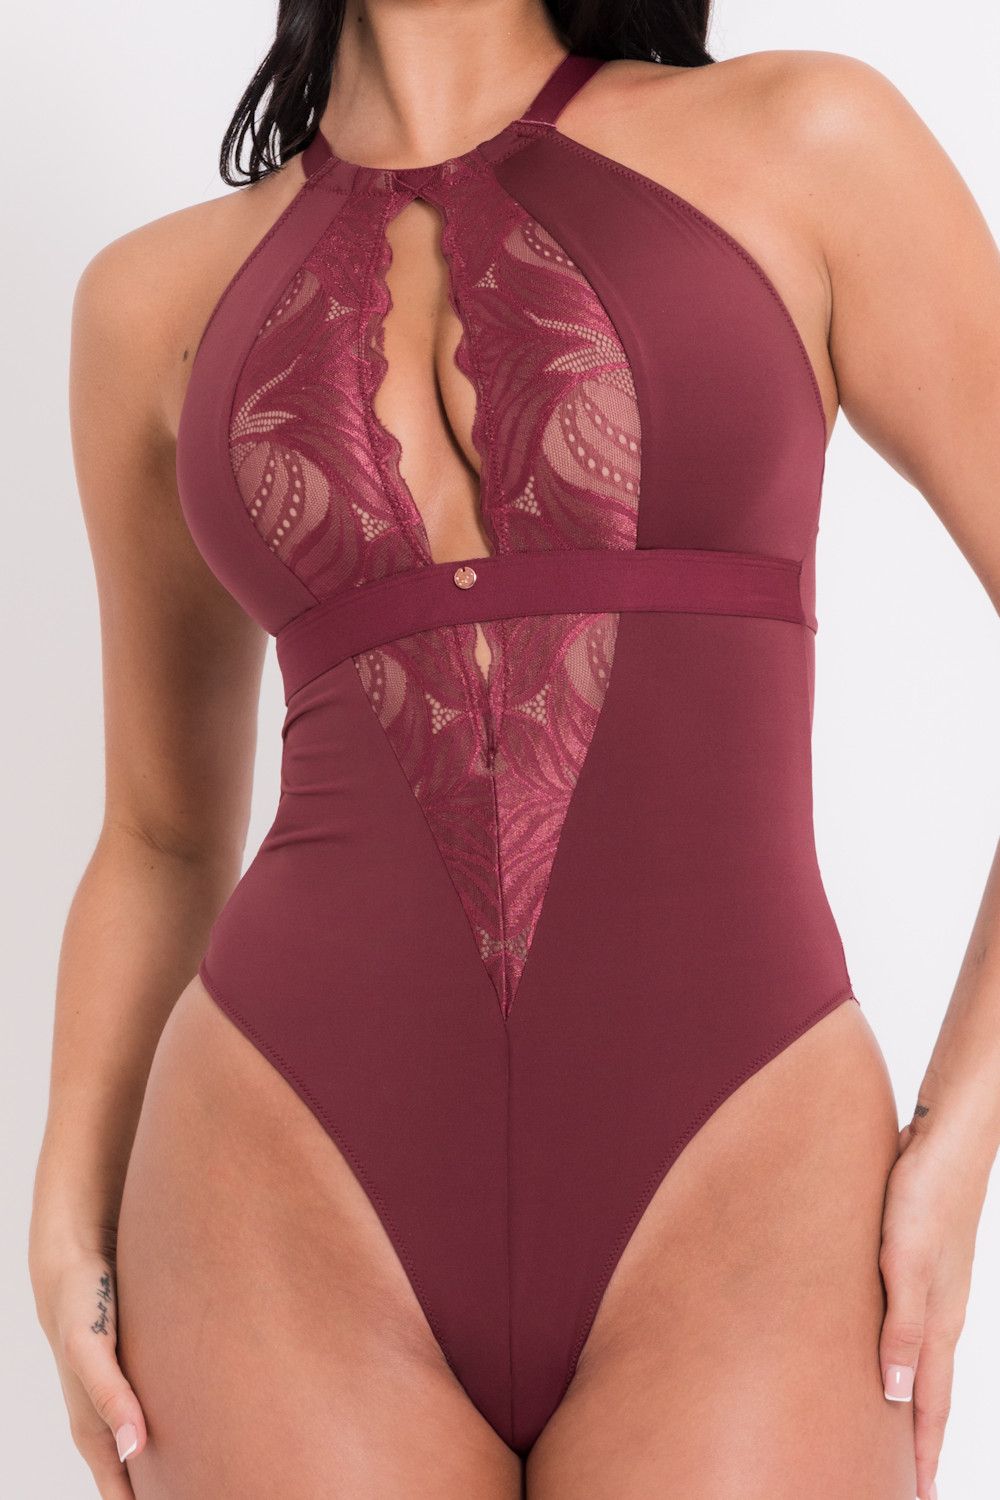 Scantilly by Curvy Kate Indulgence Lace Body Jade